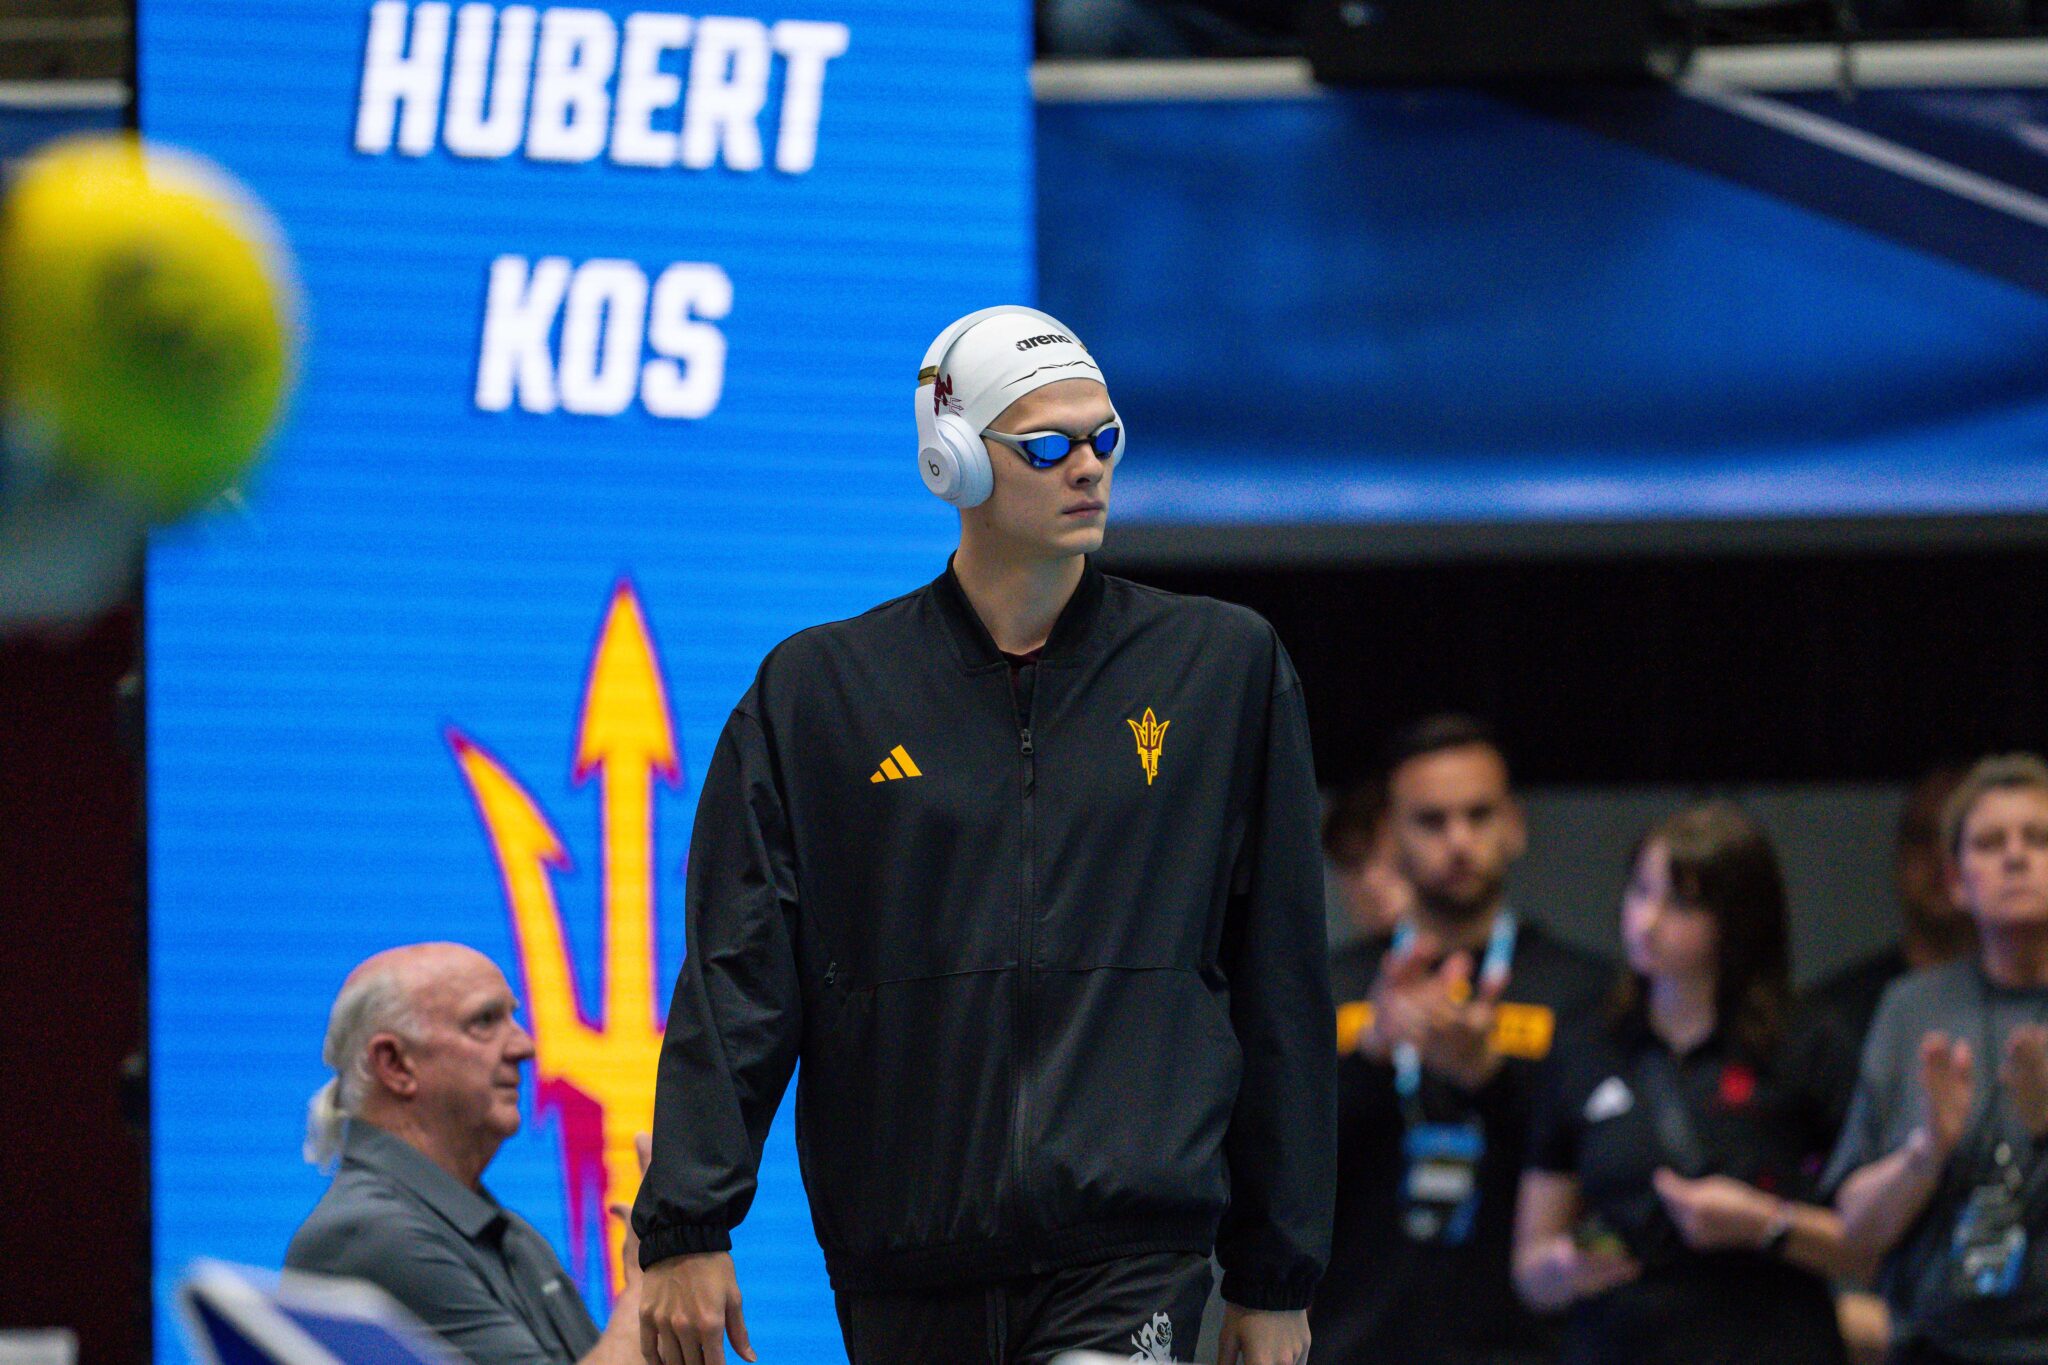 Newest member of the Longhorns: Hubert Kos, the 2024 NCAA Champion and former Arizona State swimmer